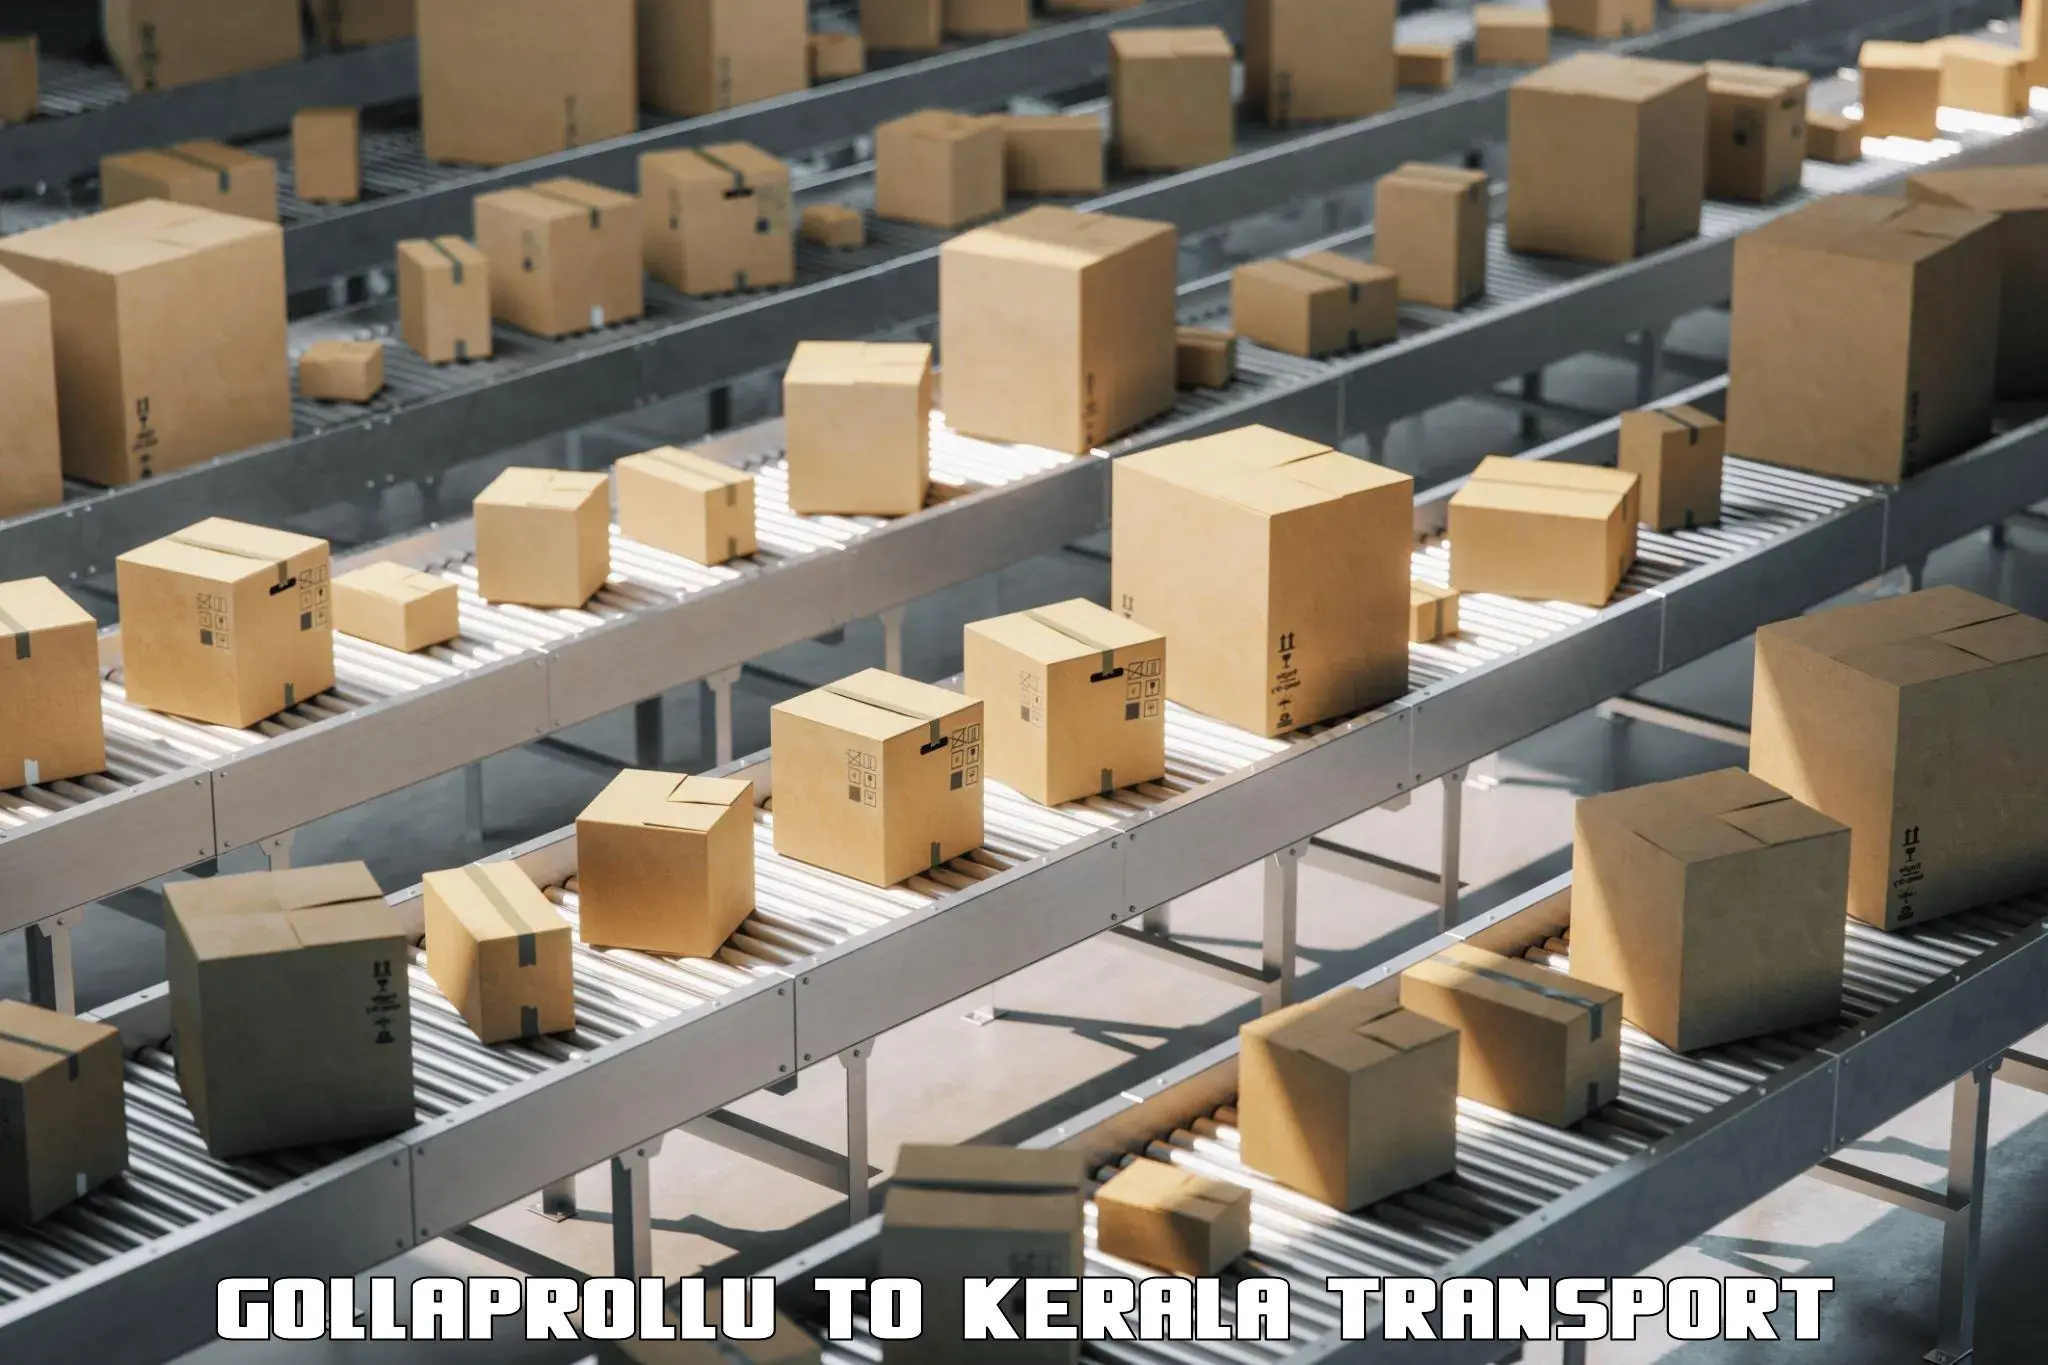 Container transport service Gollaprollu to Kerala